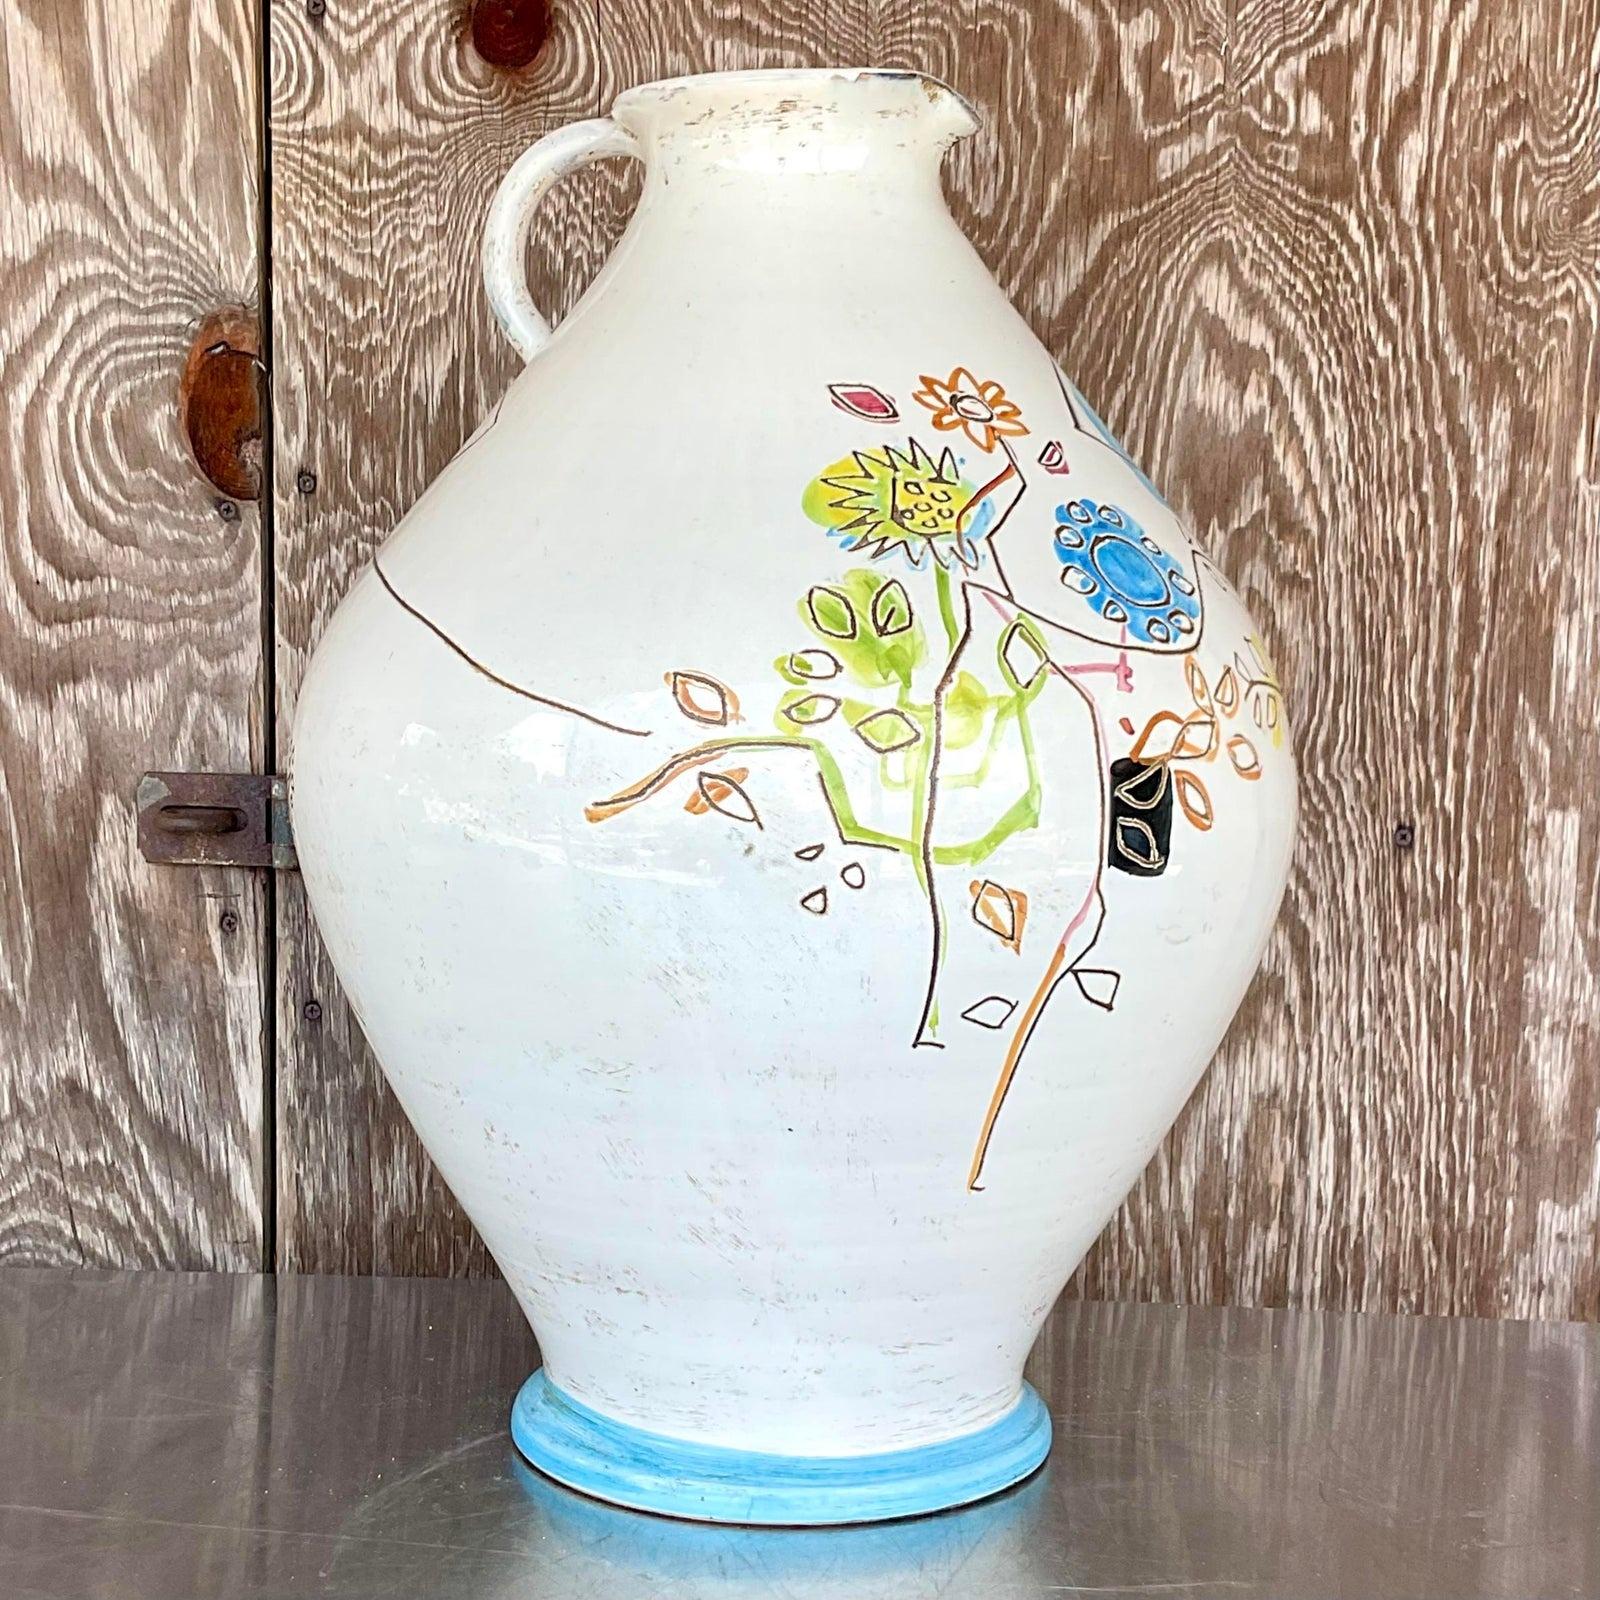 Vintage Boho Manlio Barcosi Italian Pottery Jug In Good Condition For Sale In west palm beach, FL